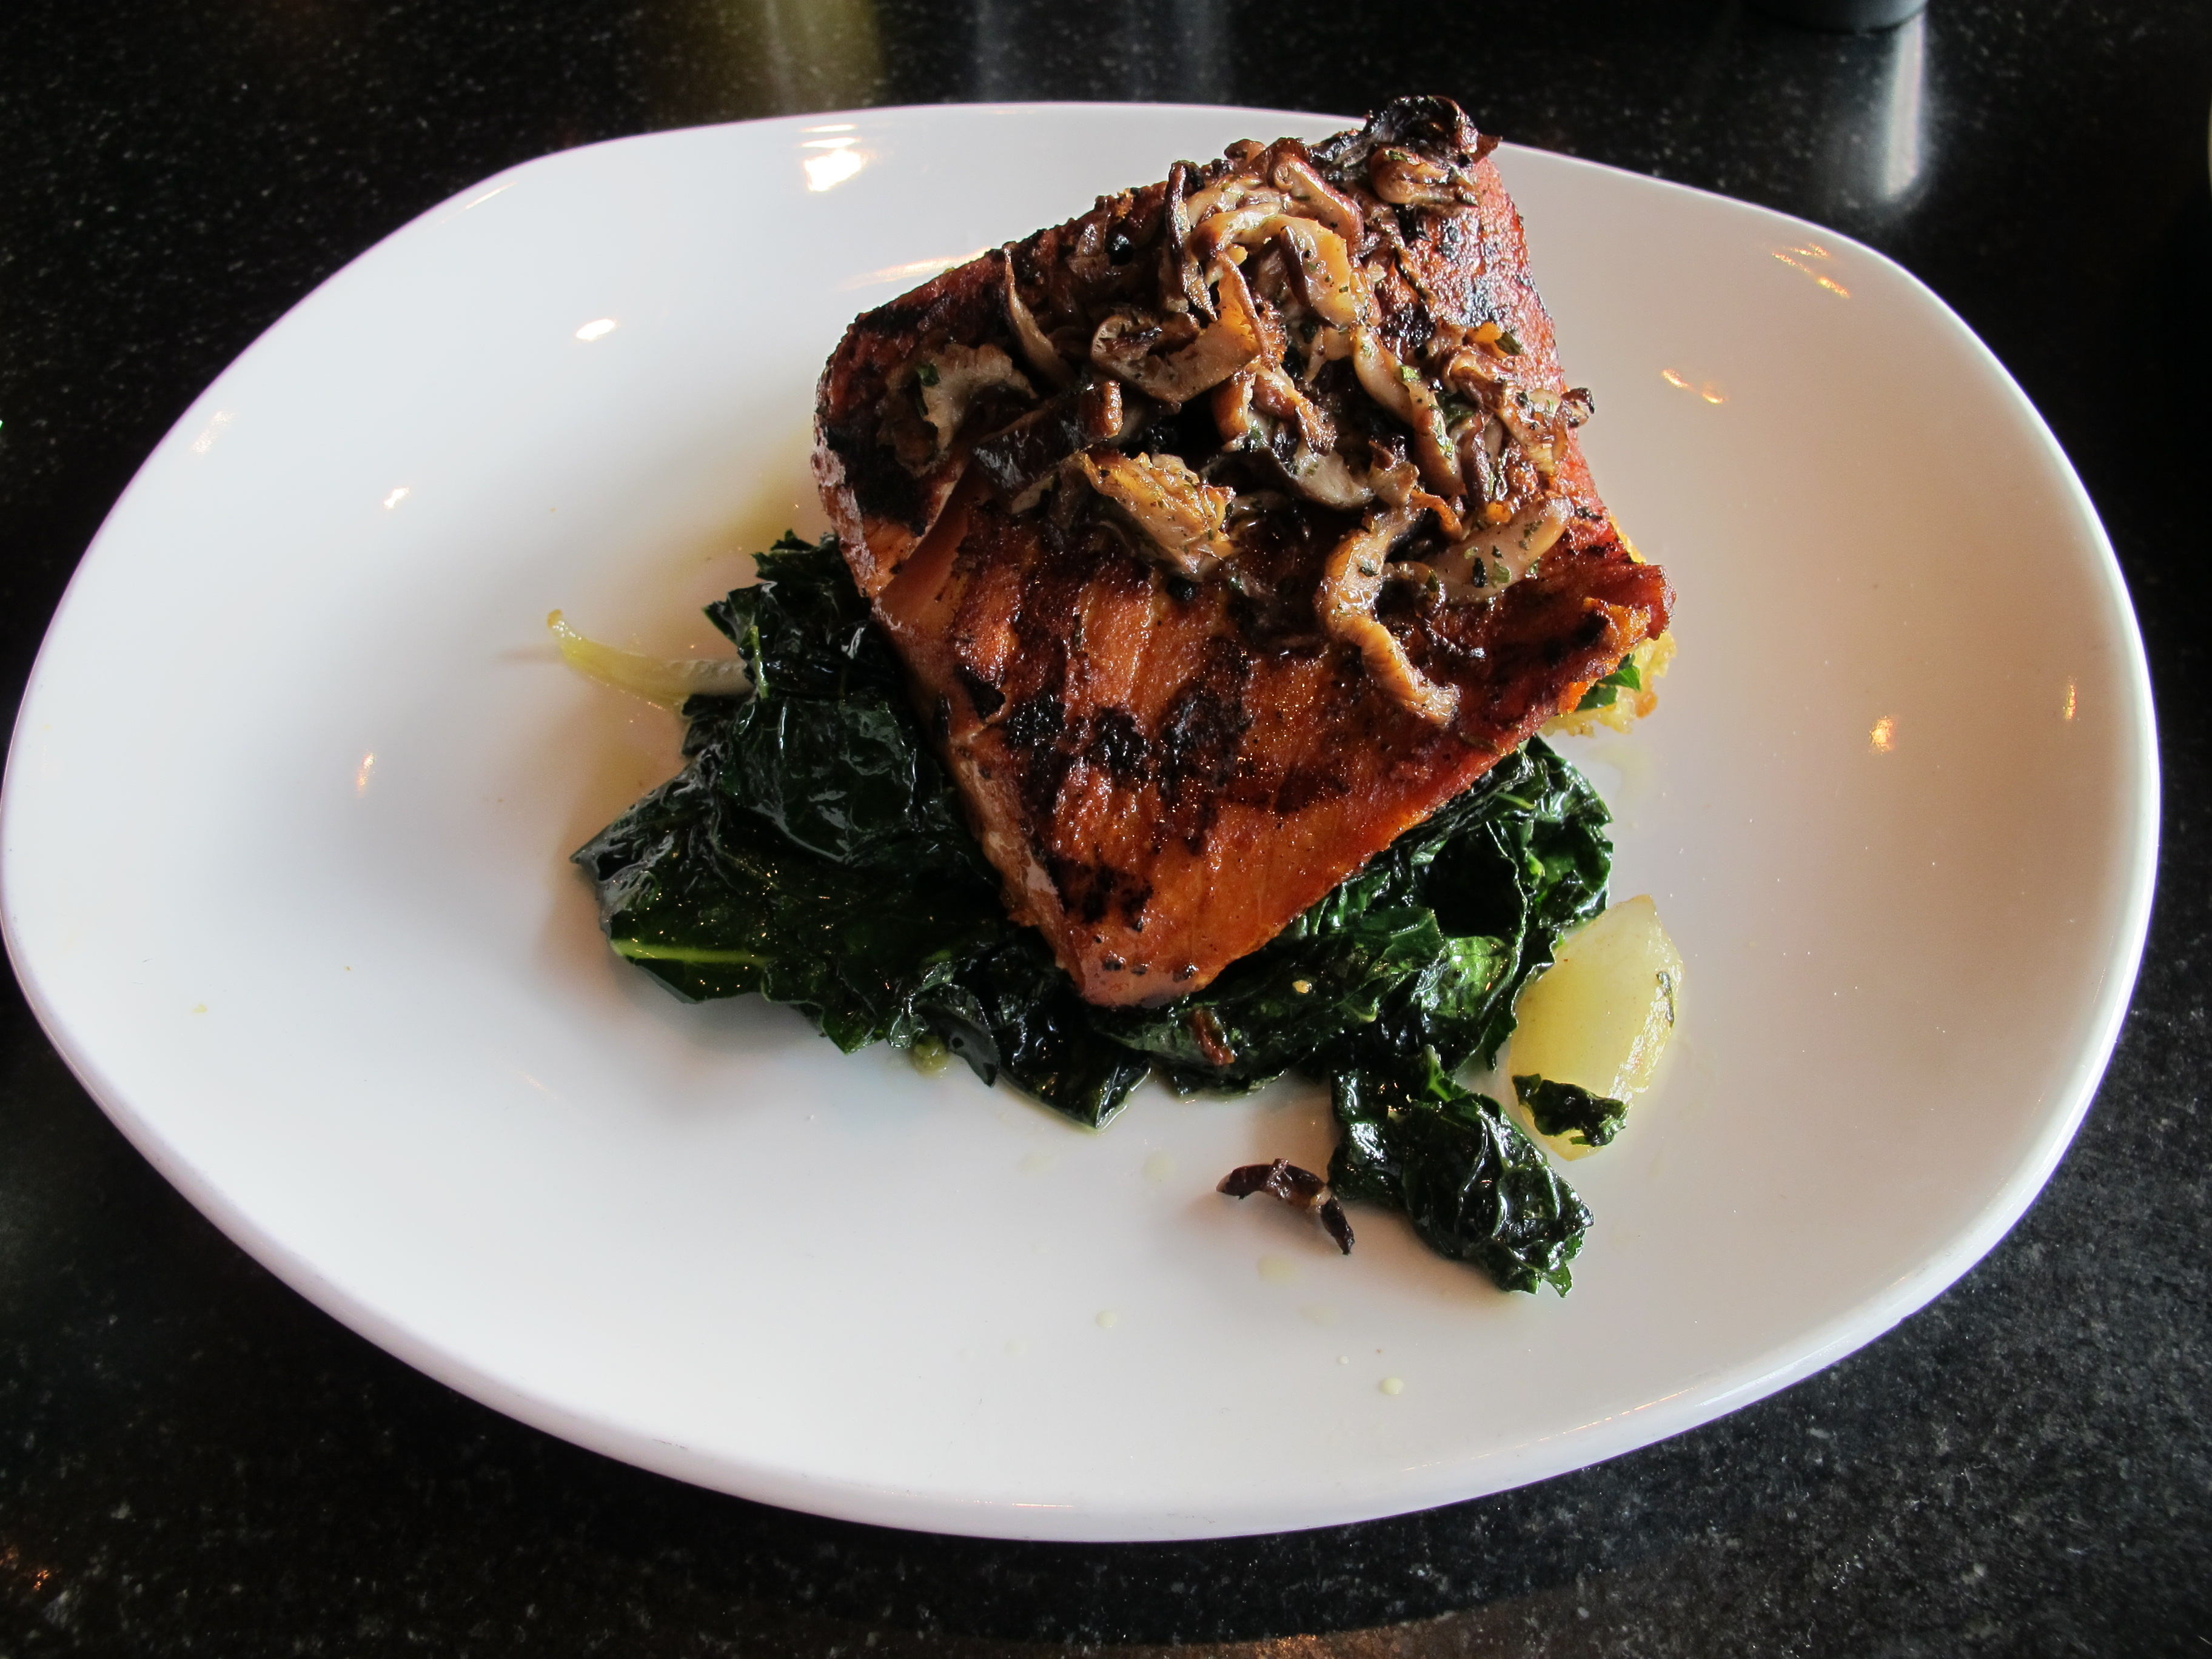 Etta's signature dish of salmon with sauteed buttered kale